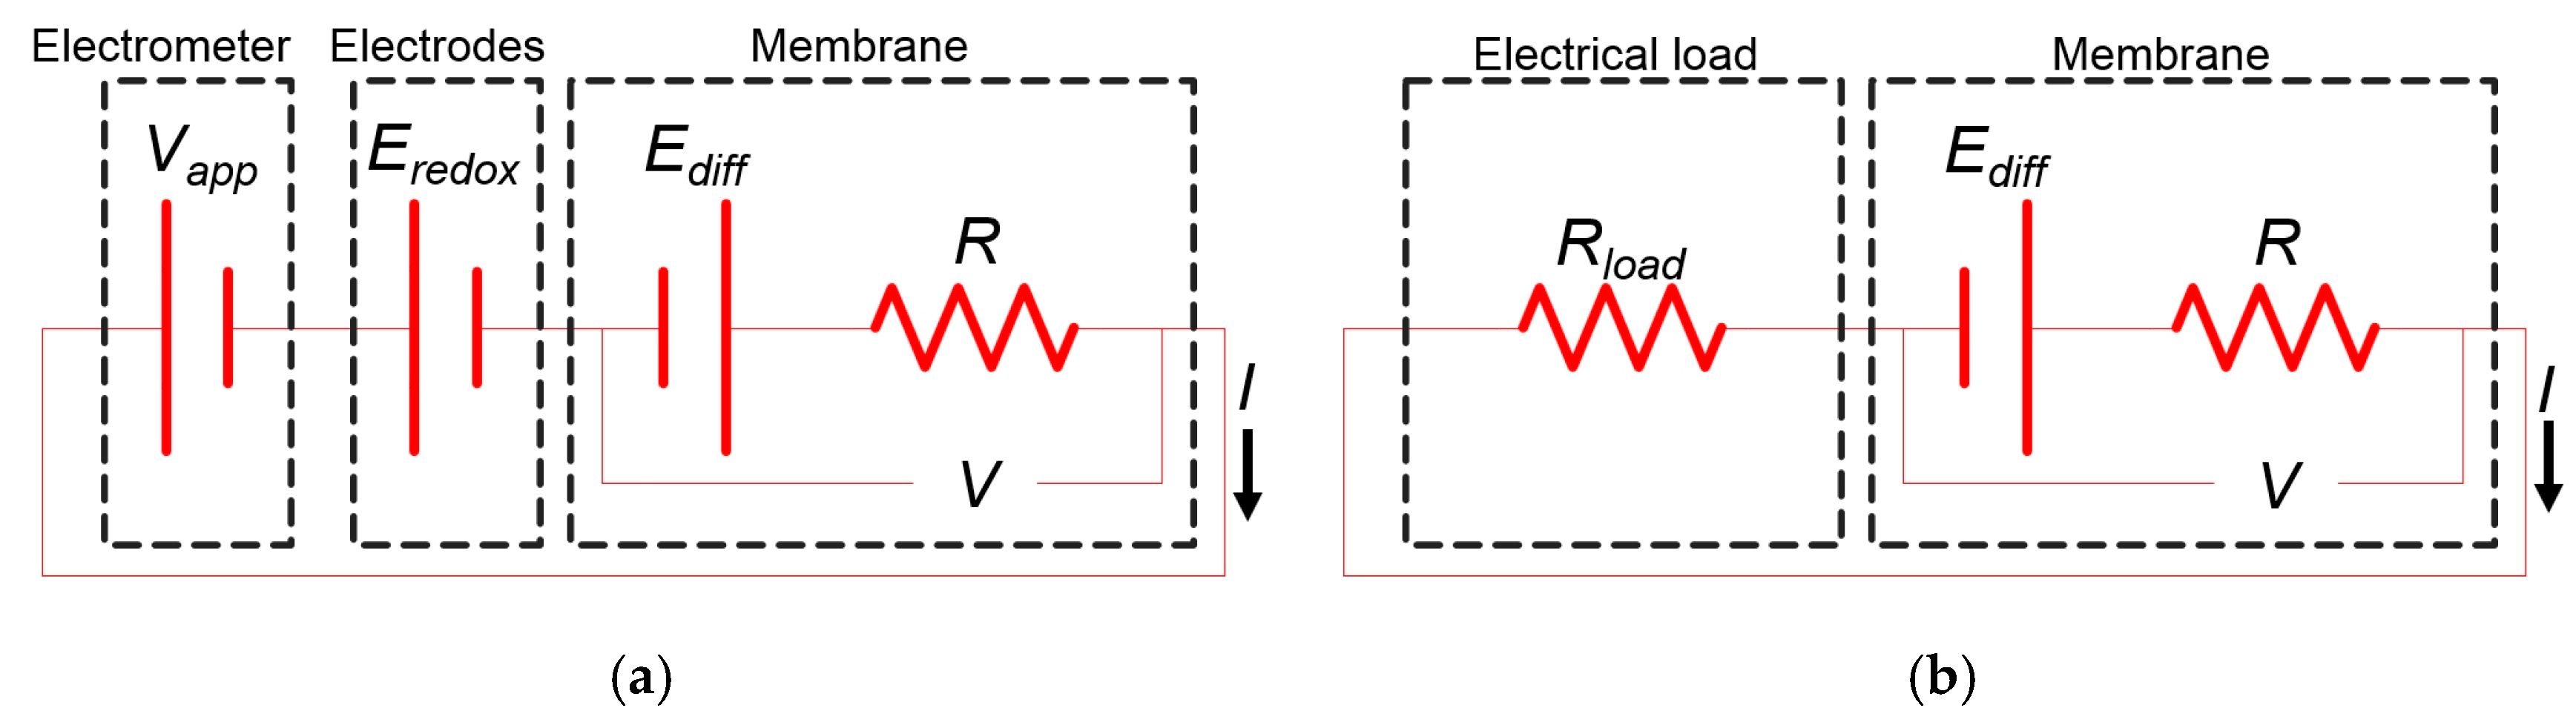 ne moves down or against its electrochemical gradient